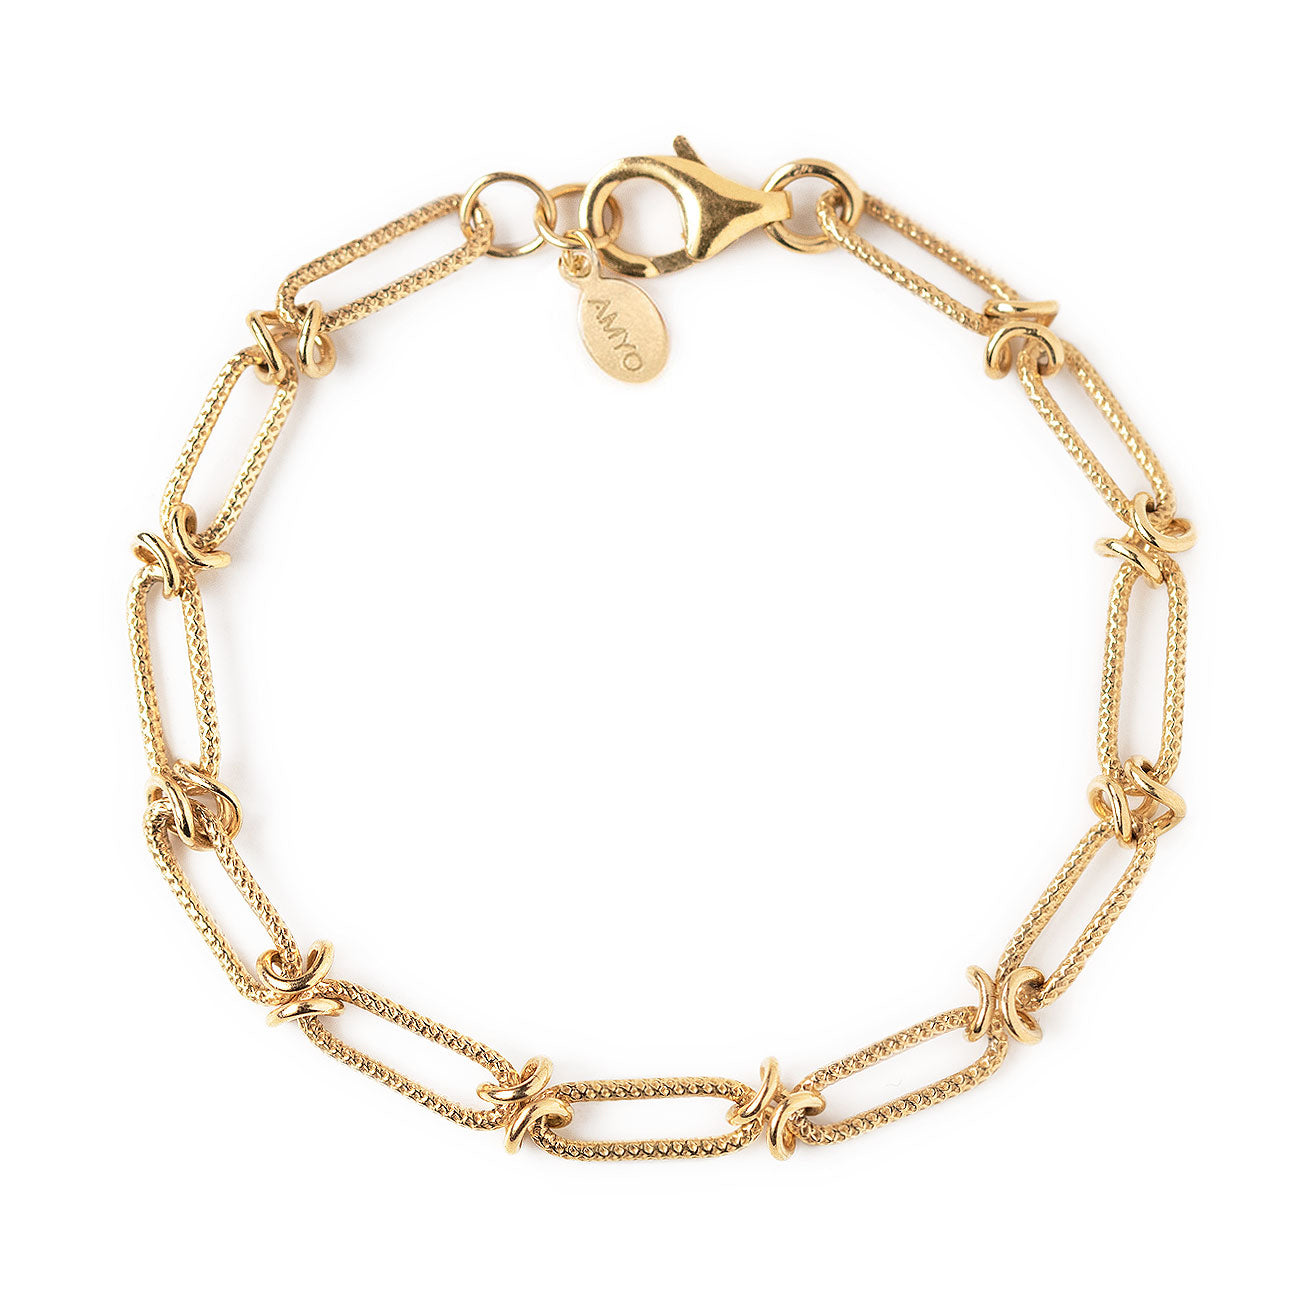 Chunky Thick Link Chain Bracelet, Womens Chain Link Bracelet 7in(18cm) / Gold Vermeil